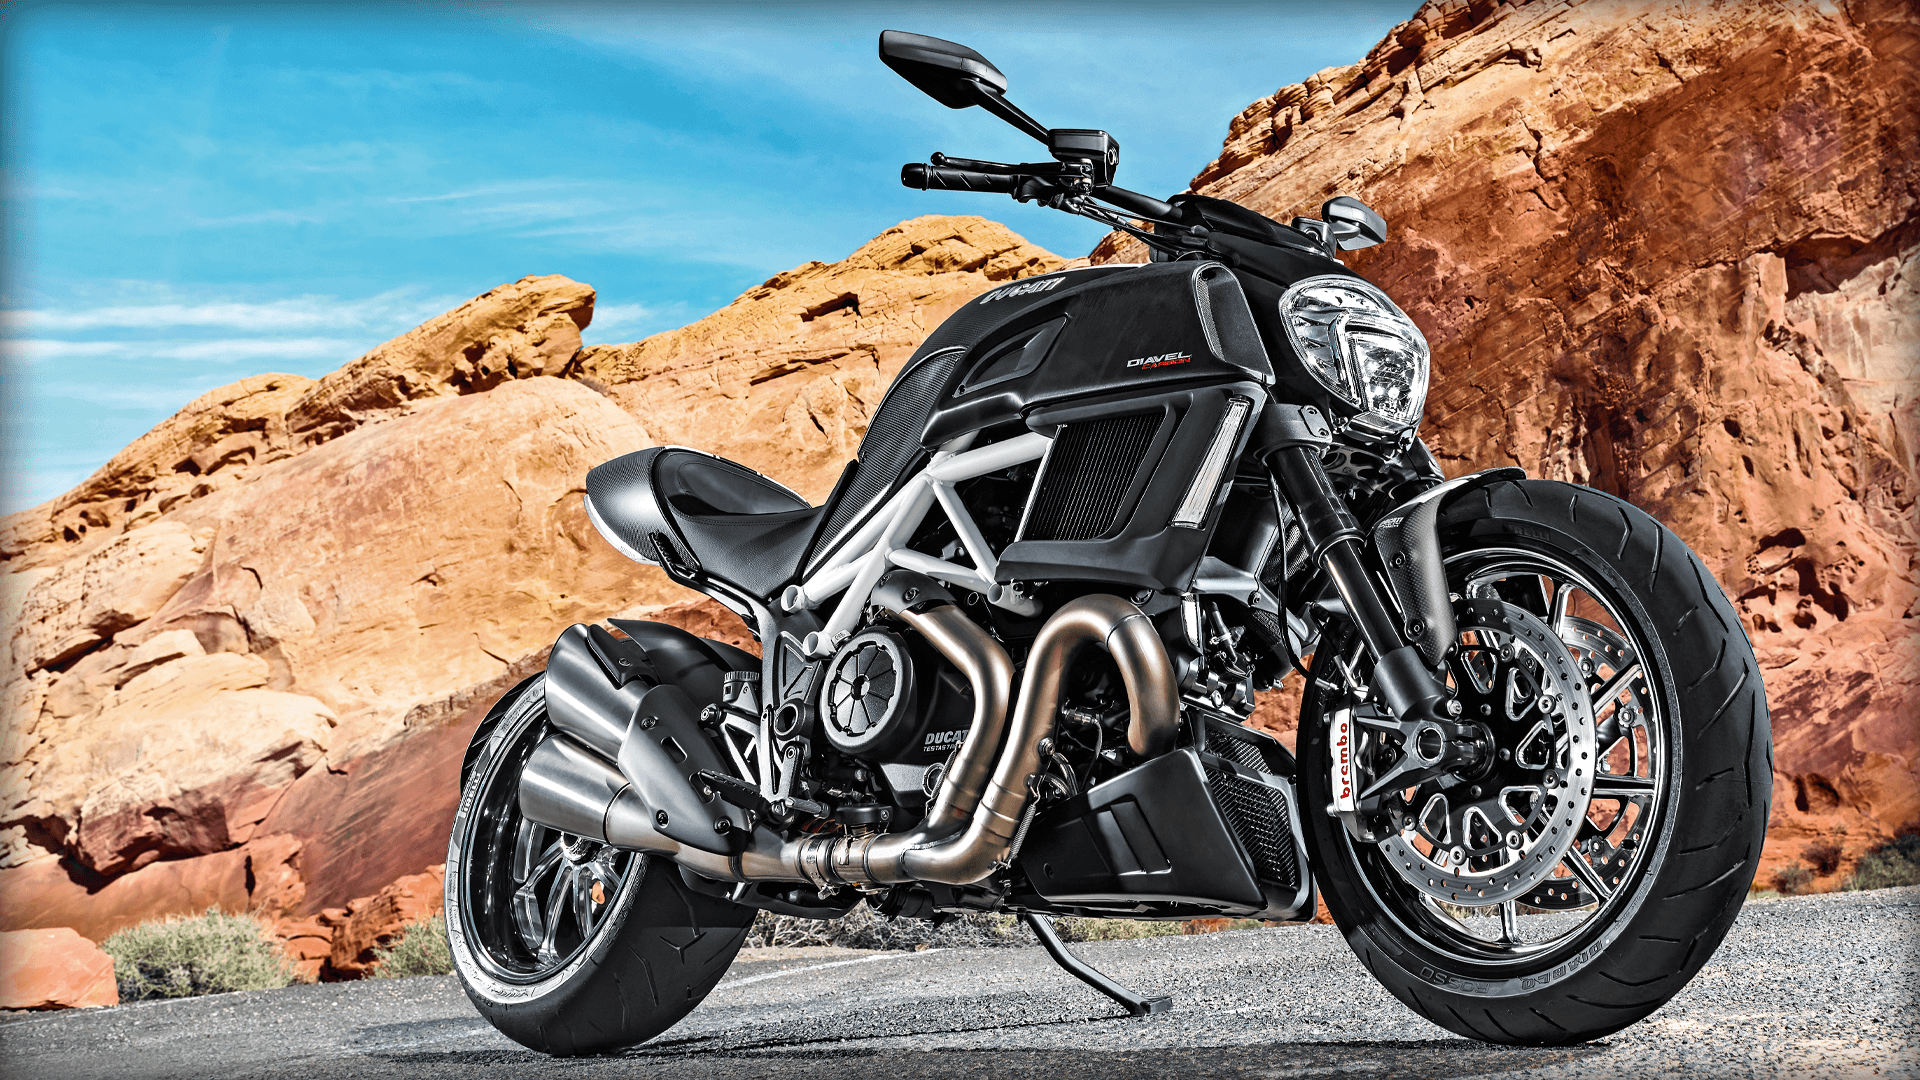 Ducati Diavel Wallpaper Image Photo Picture Background